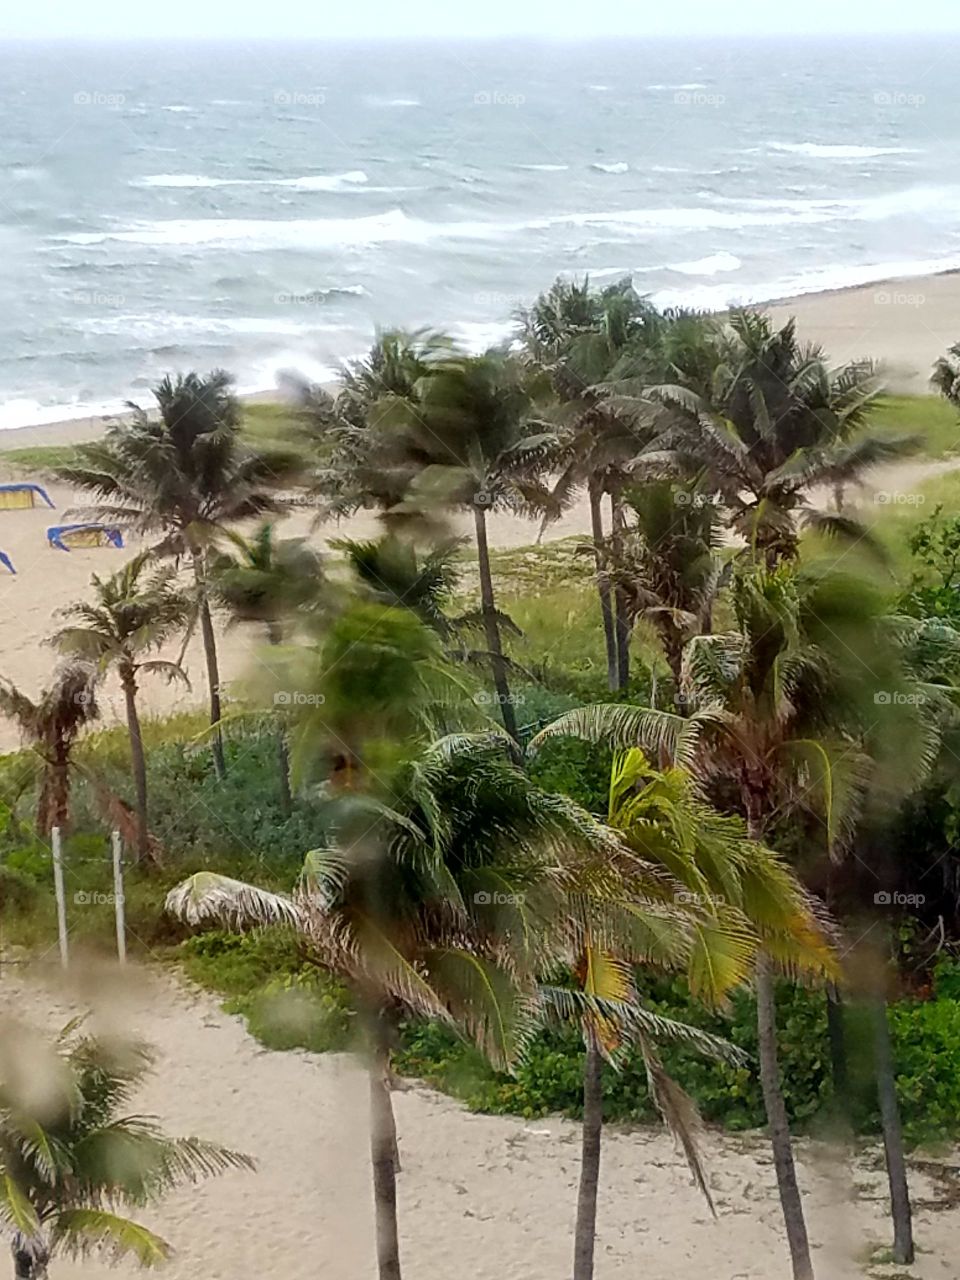 Palm trees blowing with grass beach cover after a rain storm. The waves are still rough with white caps which makes for this amazing photo!